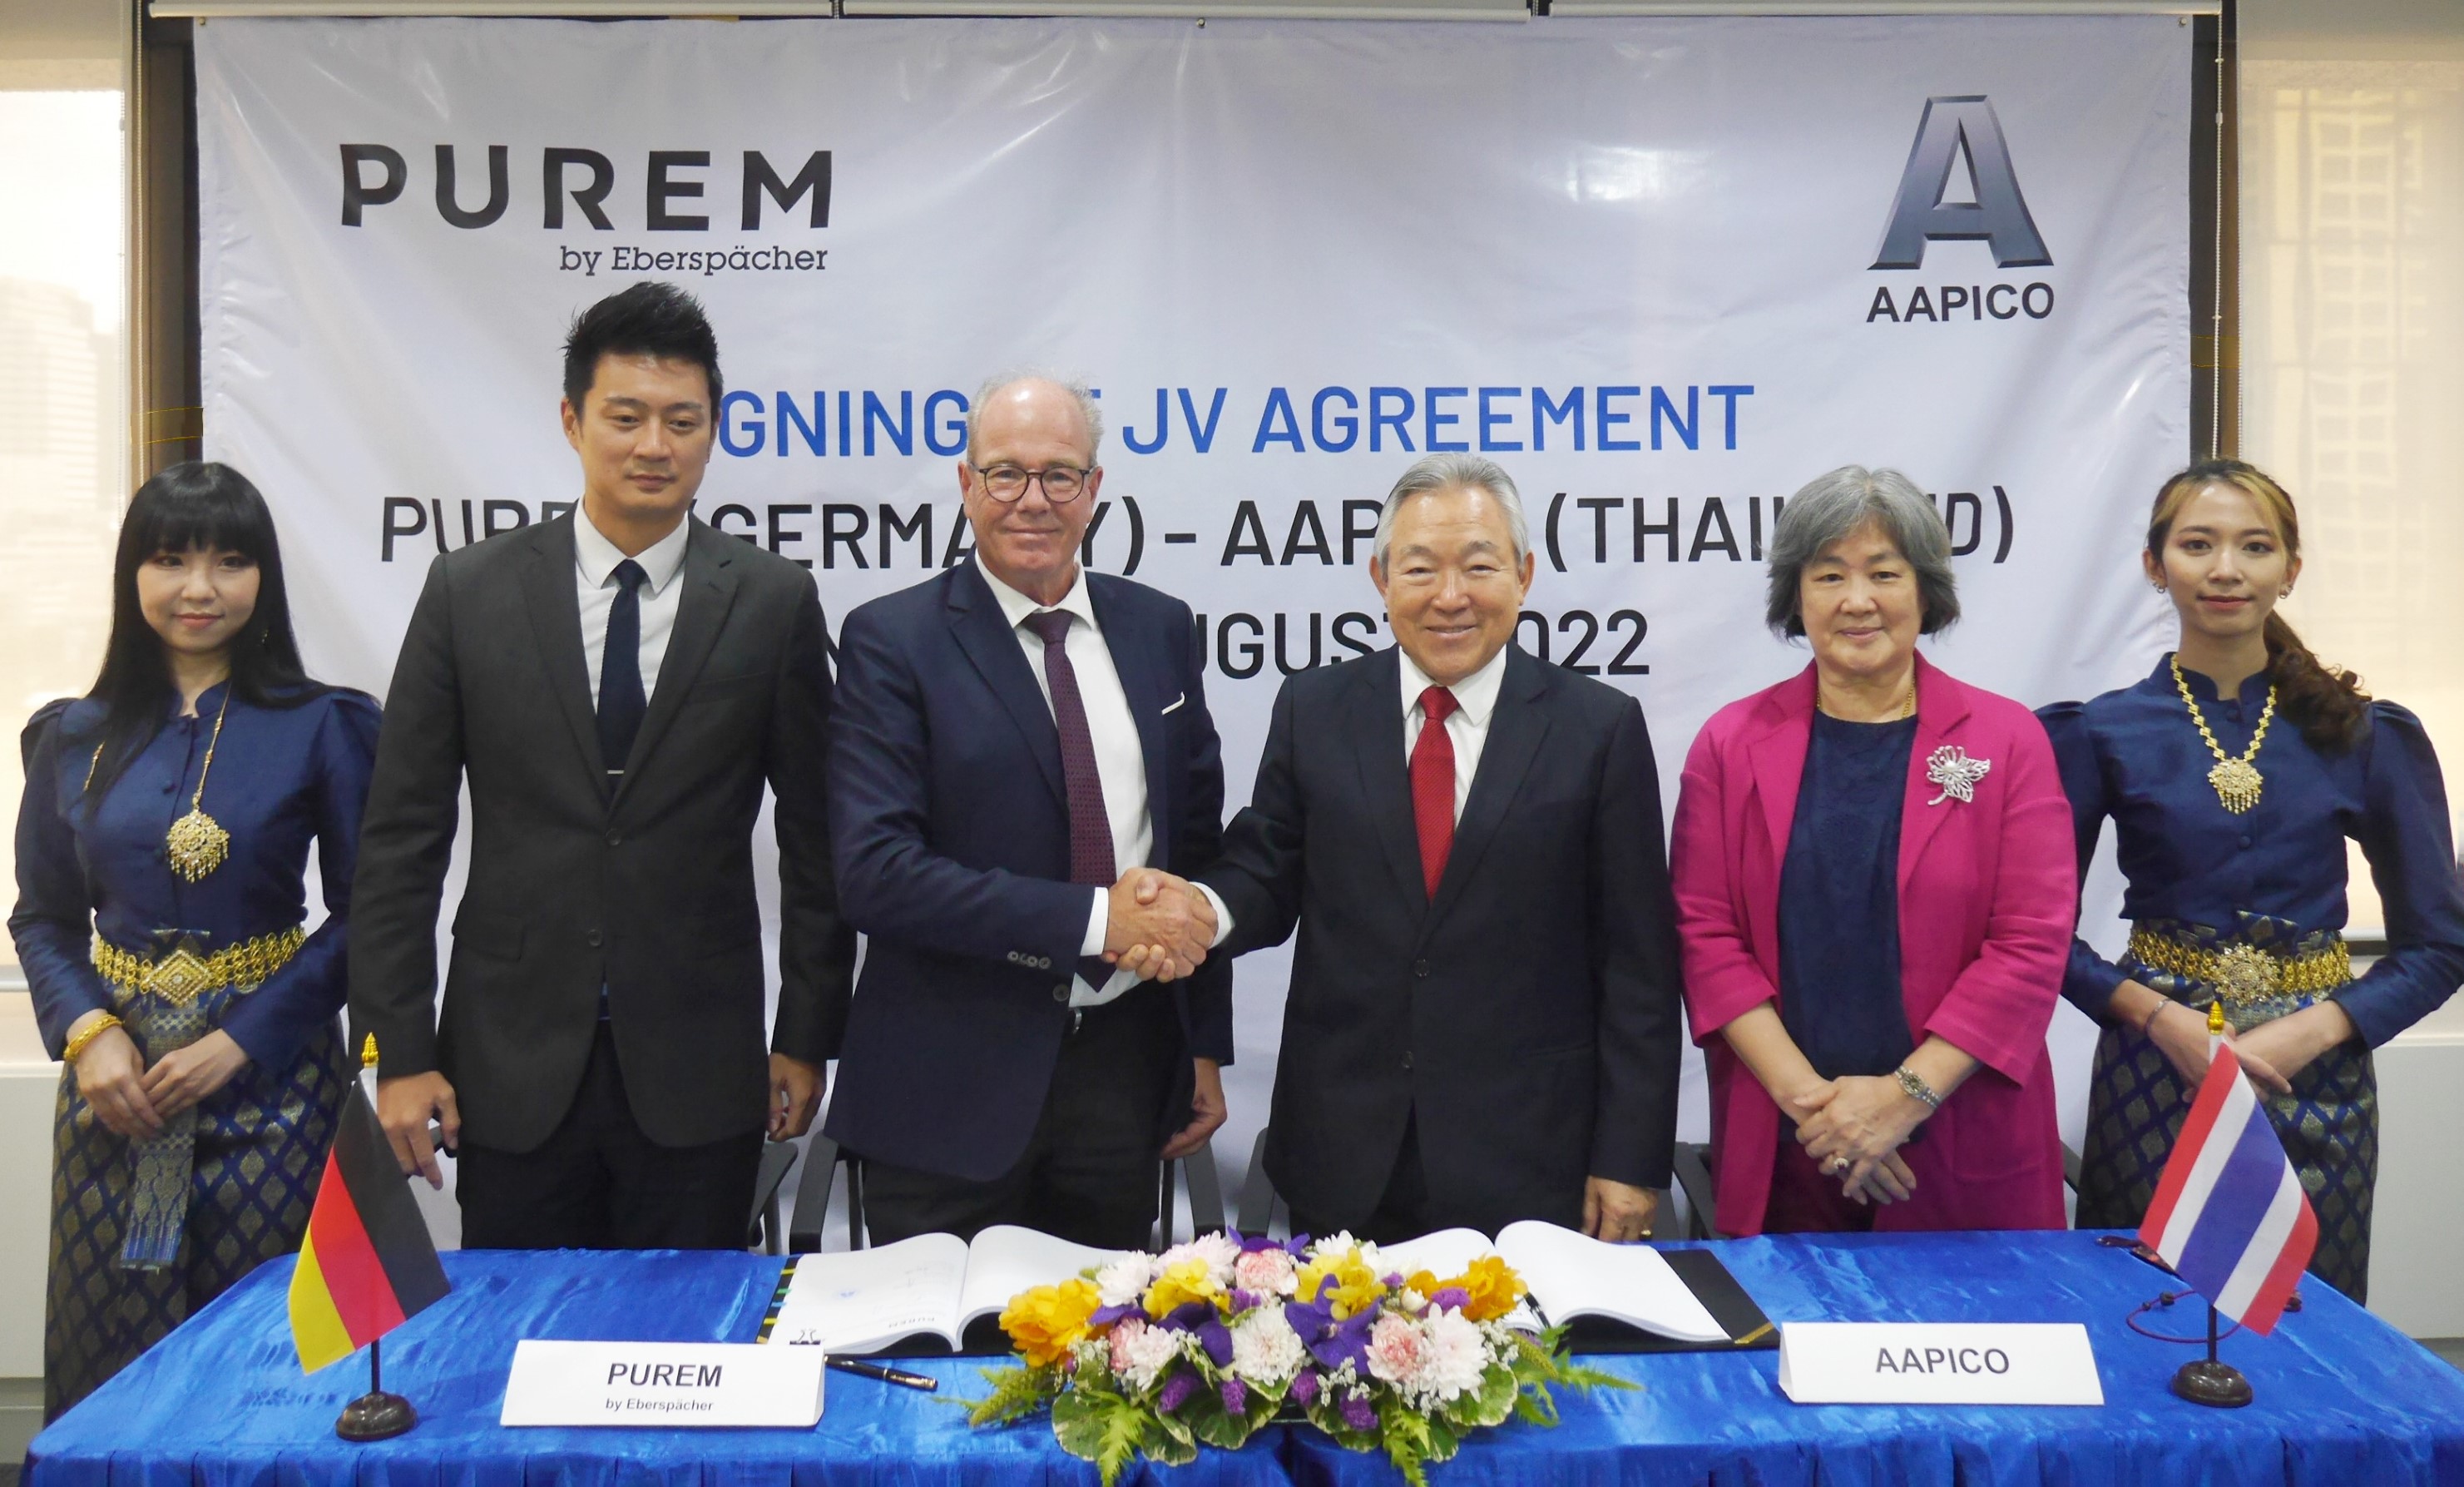 Purem by Eberspaecher and Aapico sign joint venture agreement